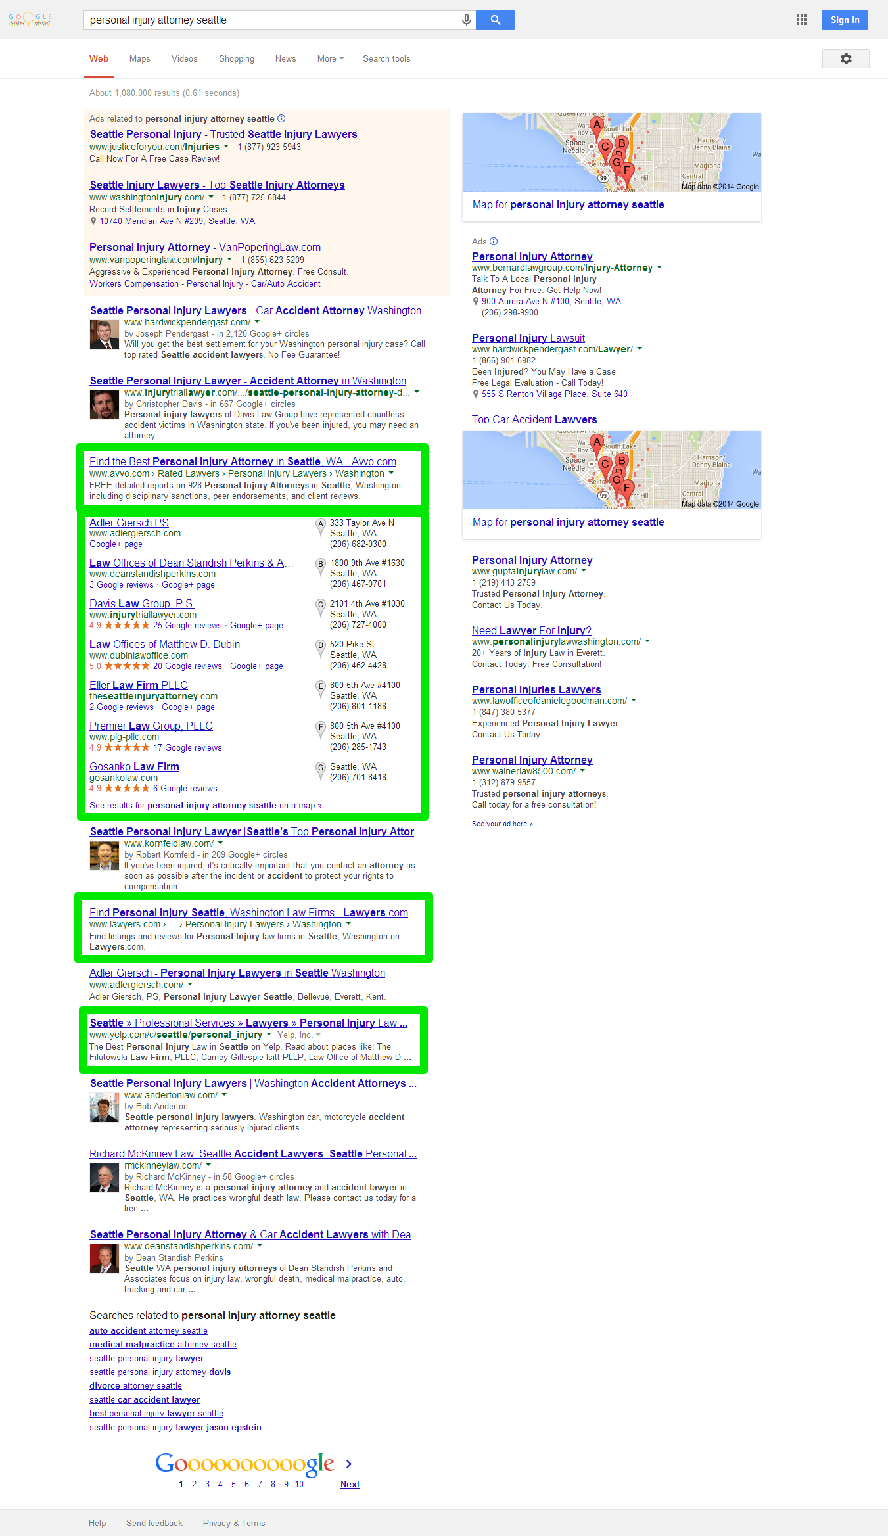 personal injury attorney seattle   Google Search2